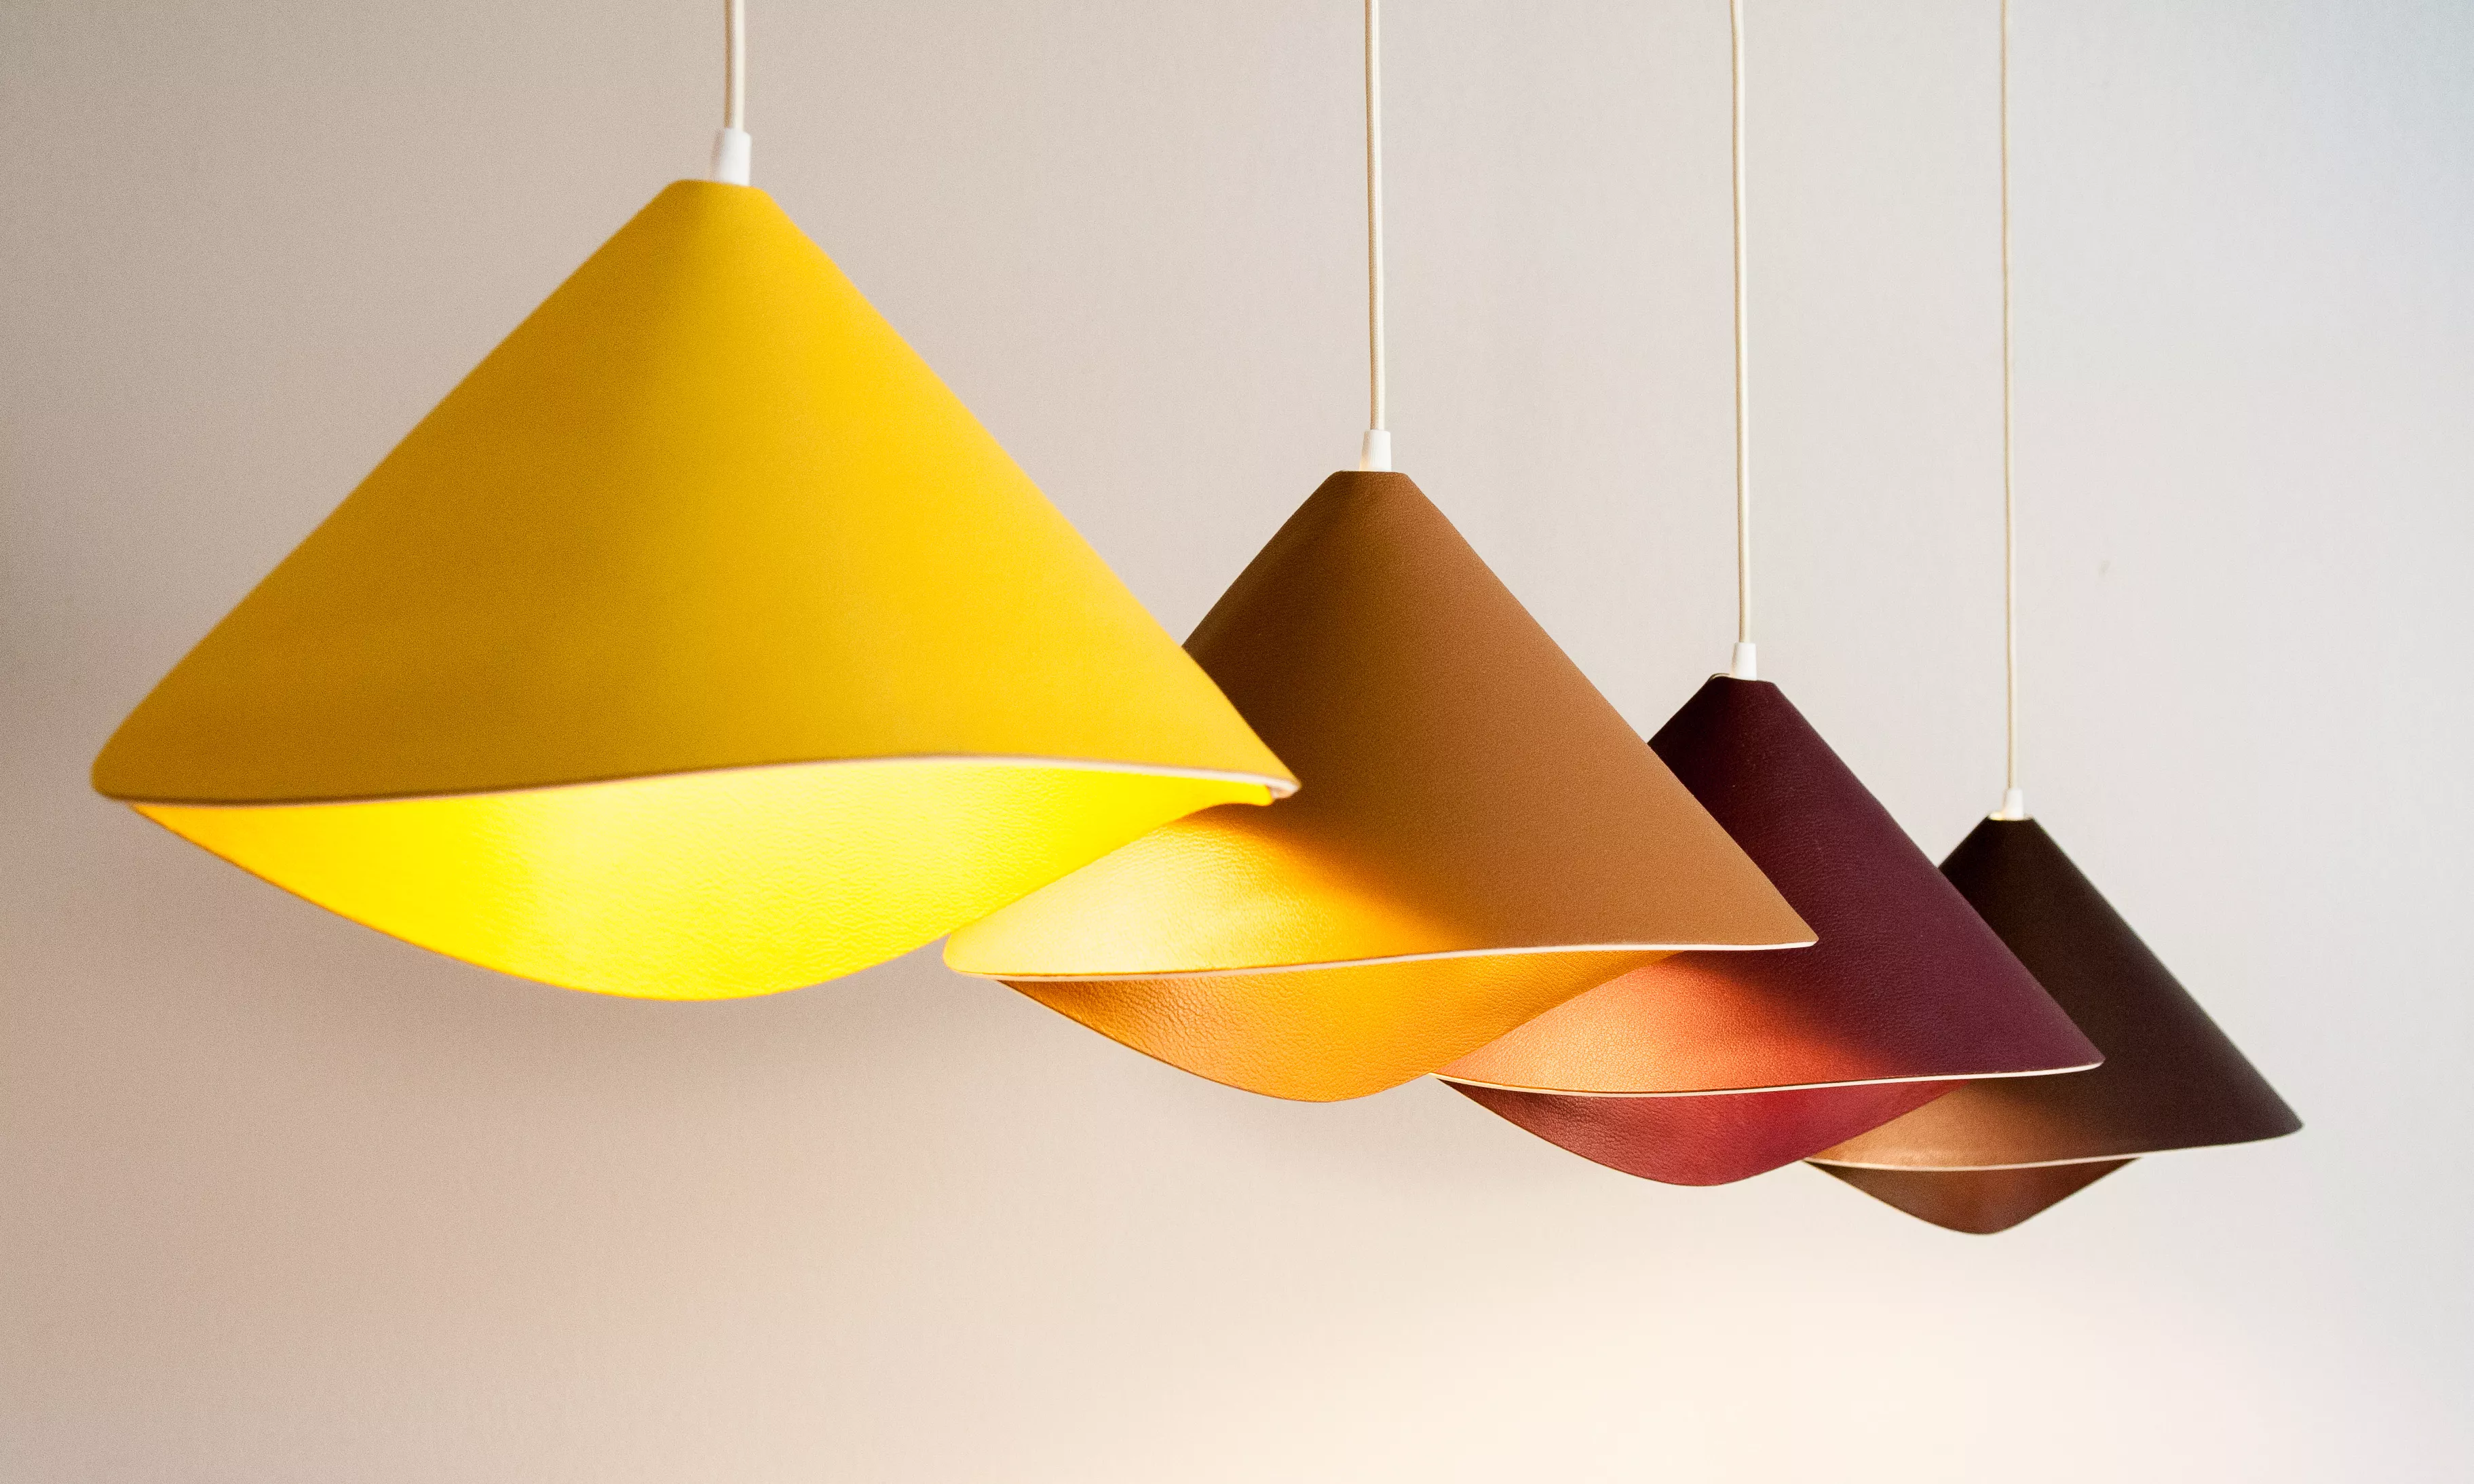 The return of the iconic Tulip lamp, with an elegant new pendant version